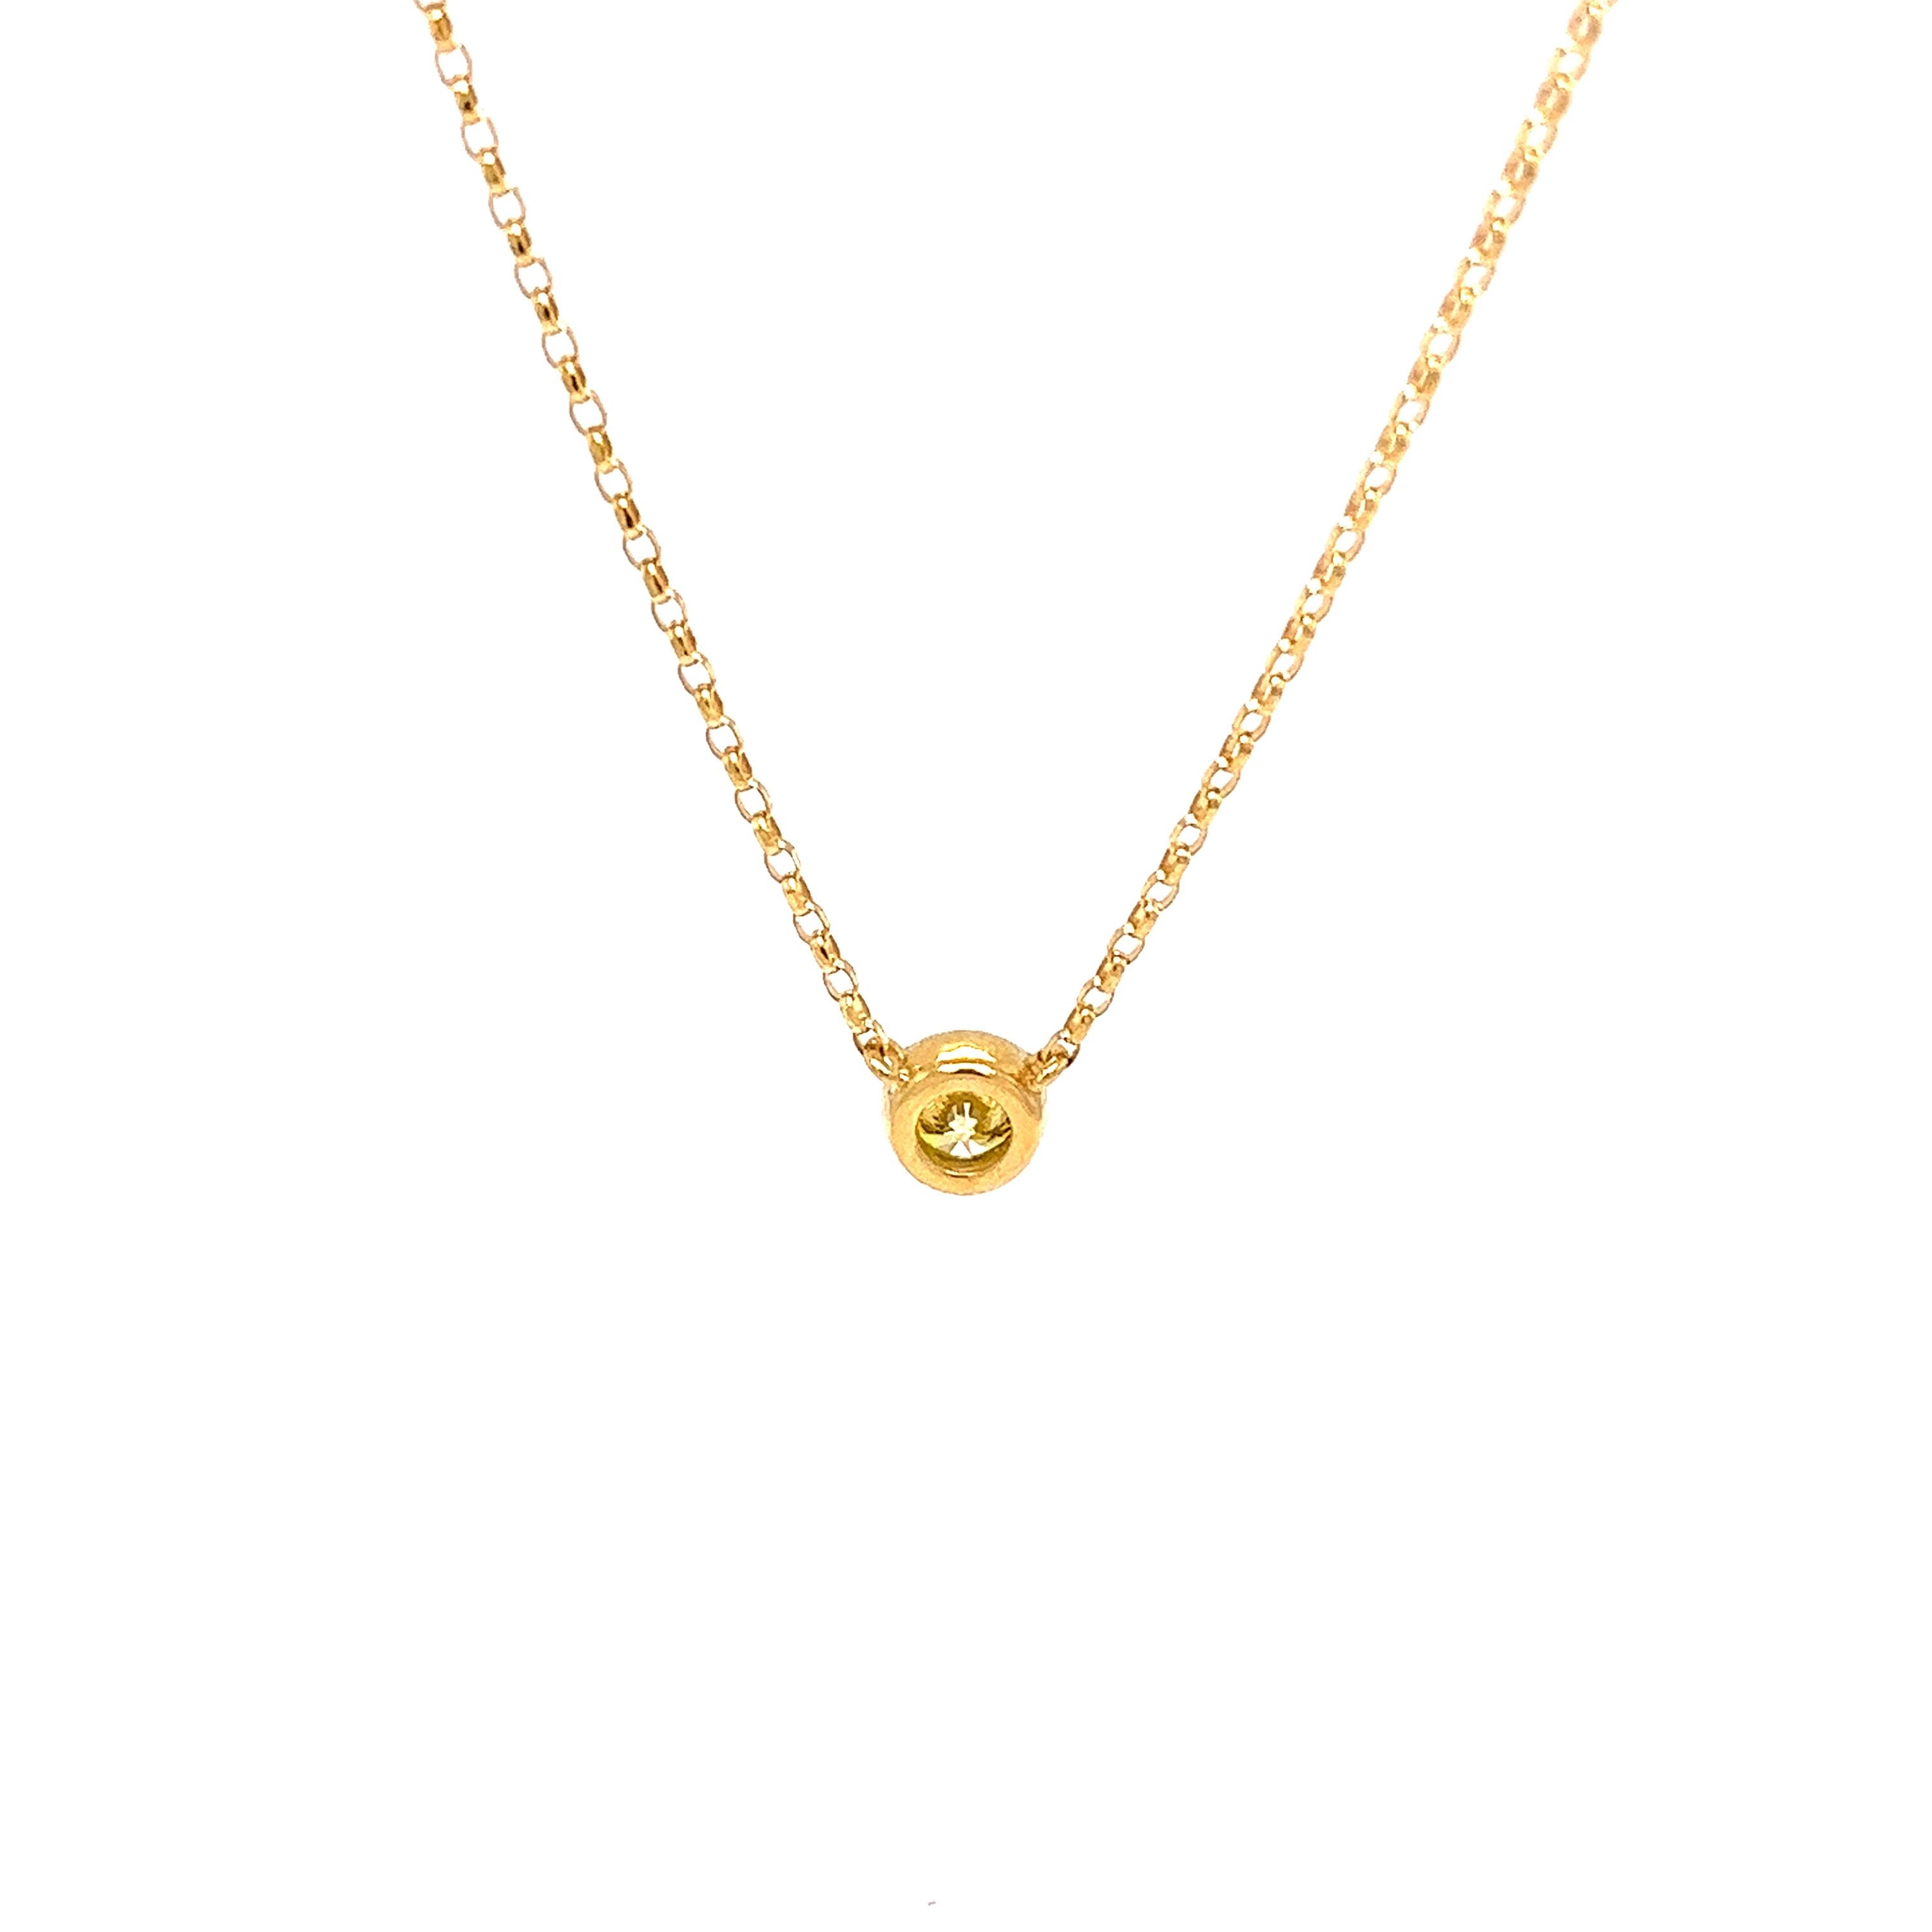 The design of this pendant is inspired by the natural beauty of the diamond. The 16